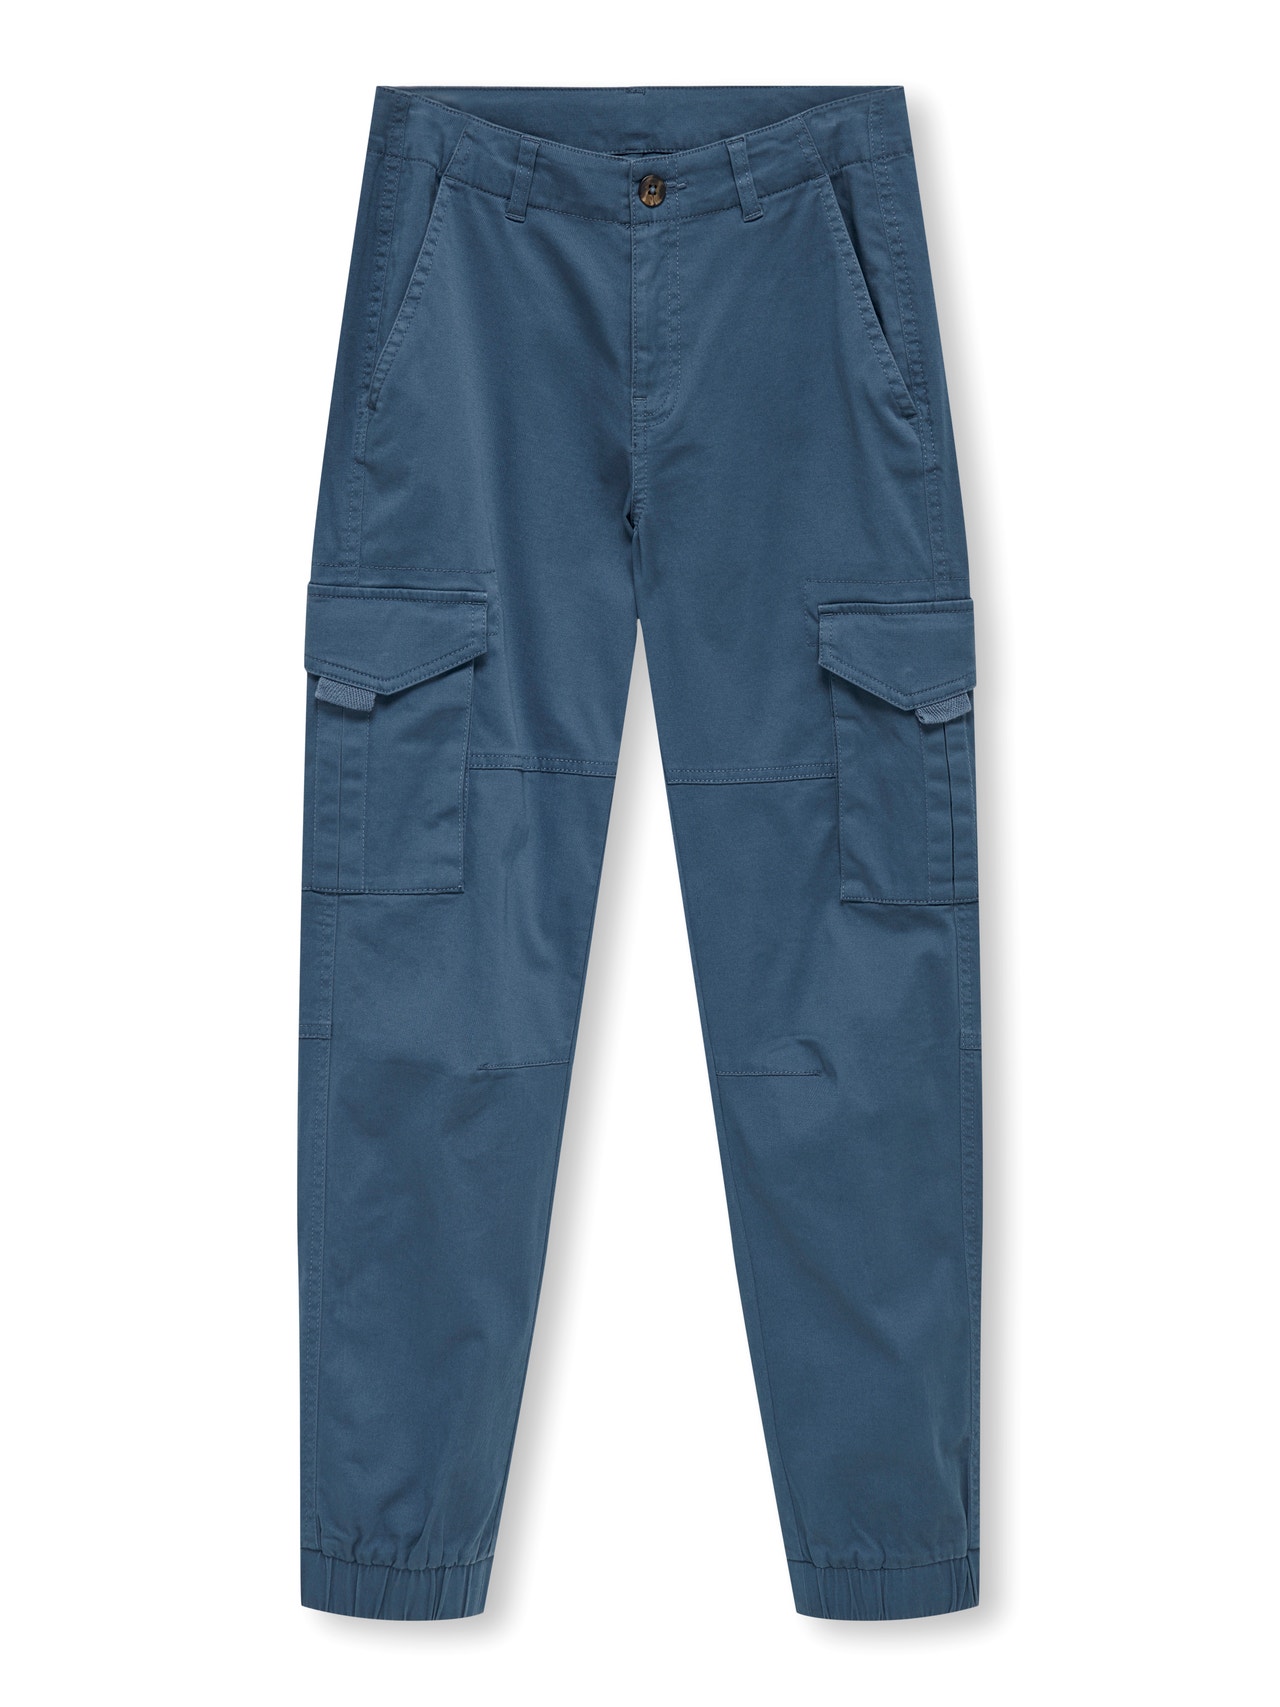 ONLY Cargo Fit Mid waist Cargo Trousers -Vintage Indigo - 15300224